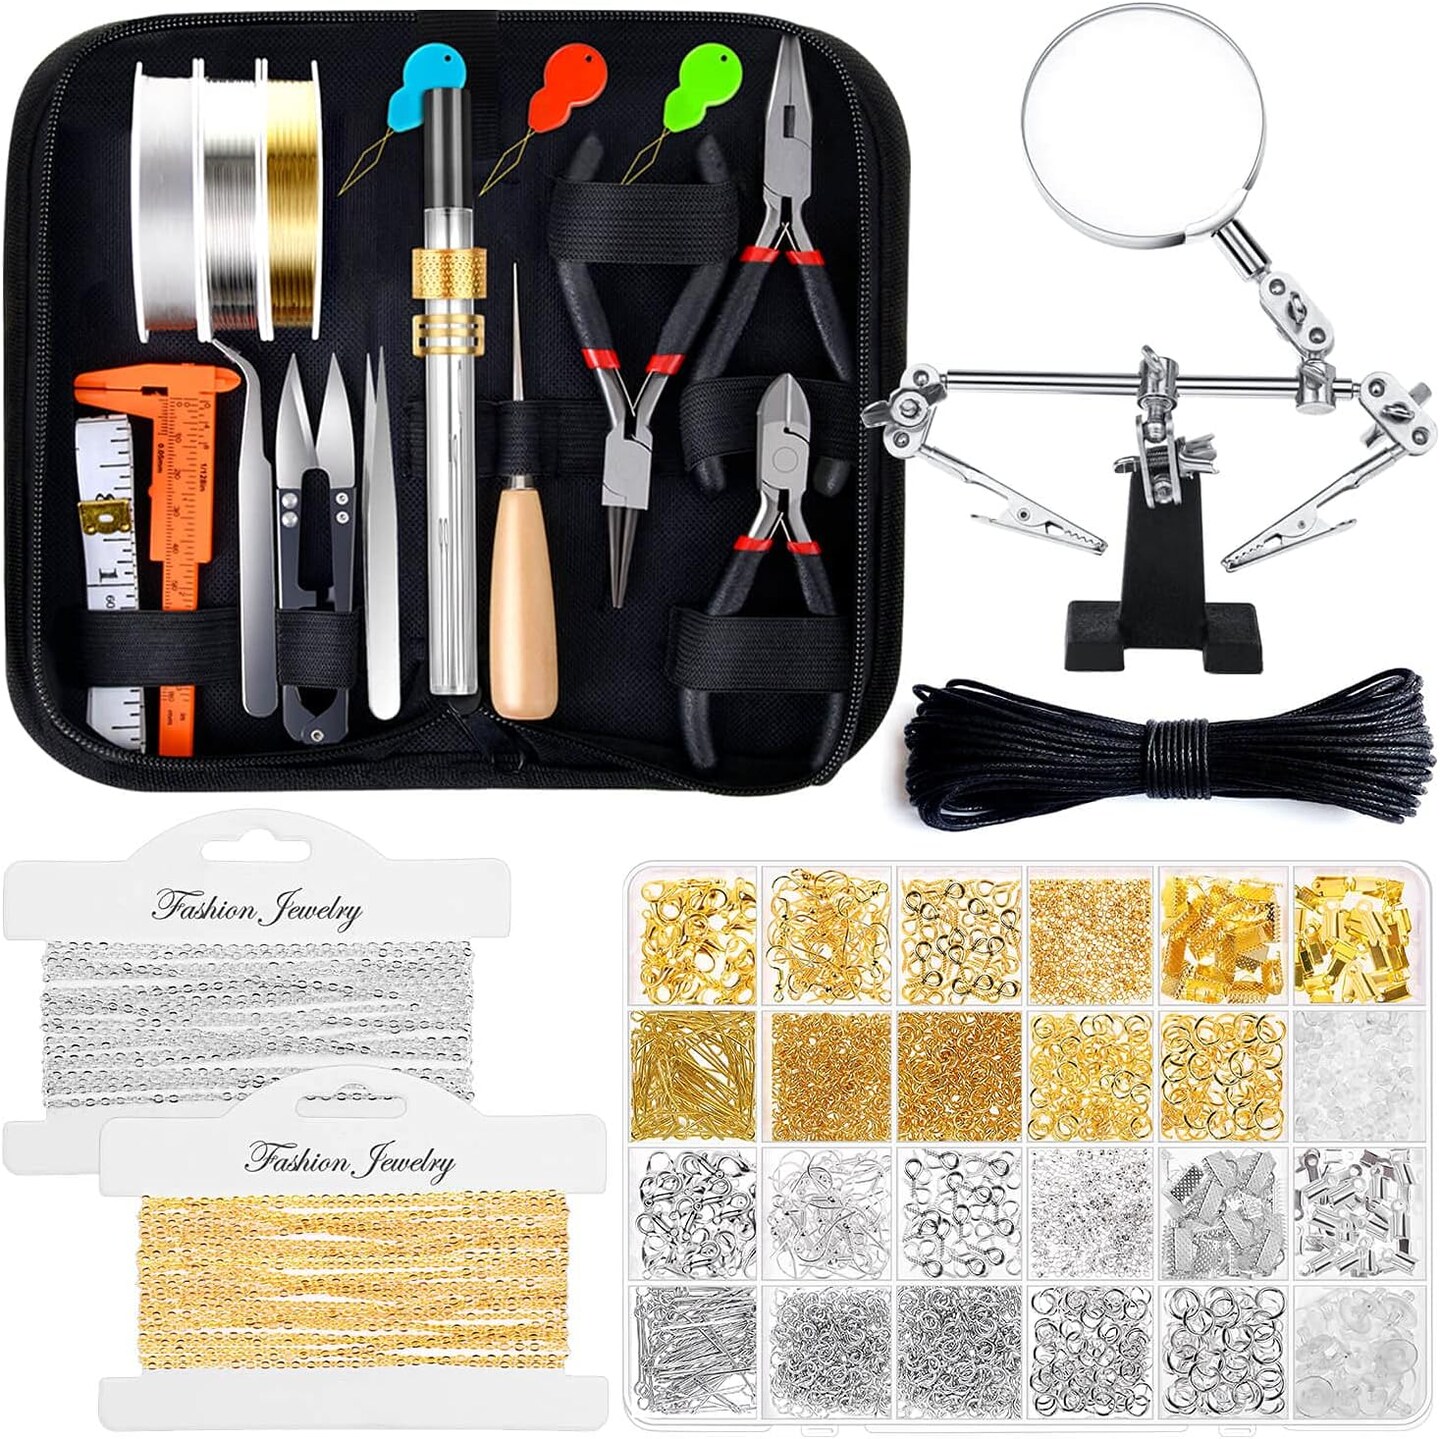 Jewelry Making Kits for Adults, Jewelry Making Supplies Kit with Jewelry Making Tools, Earring Charms, Jewelry Wires, Jewelry Findings and Helping Hands for Jewelry Making and Repair